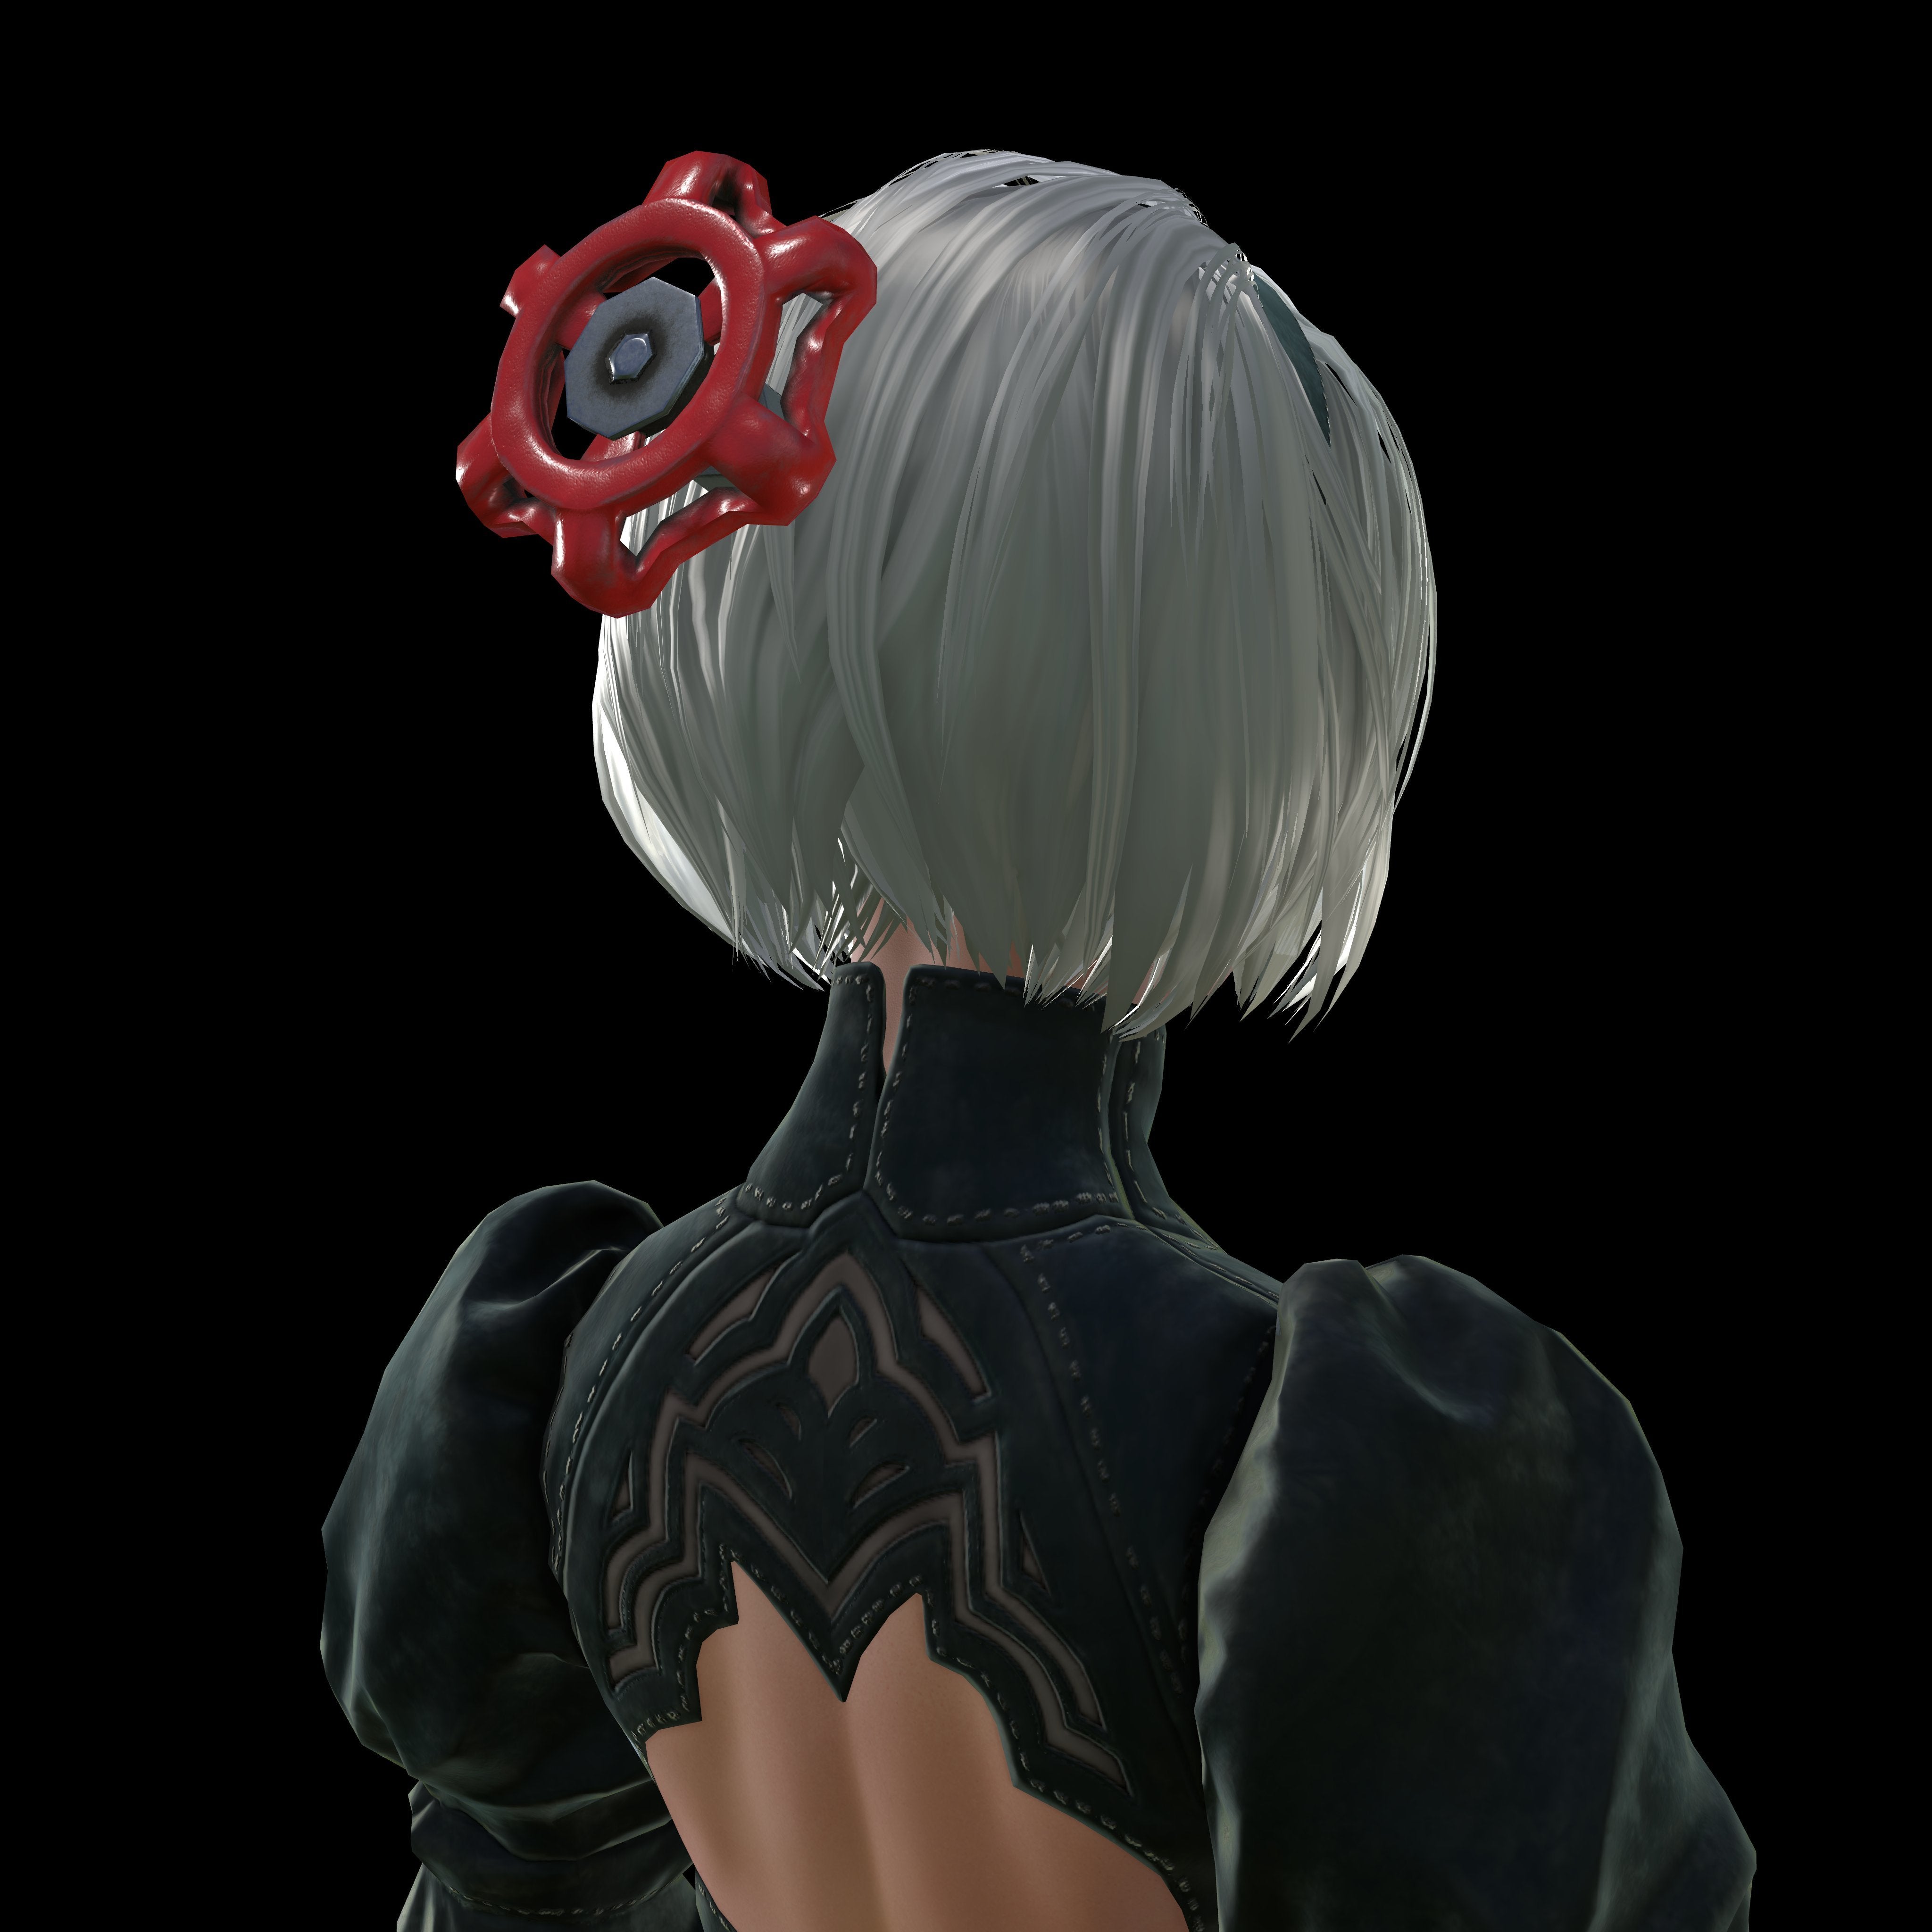 Image for Nier: Automata comes with a Valve accessory you can attach to 2B’s head when you pre-purchase on Steam